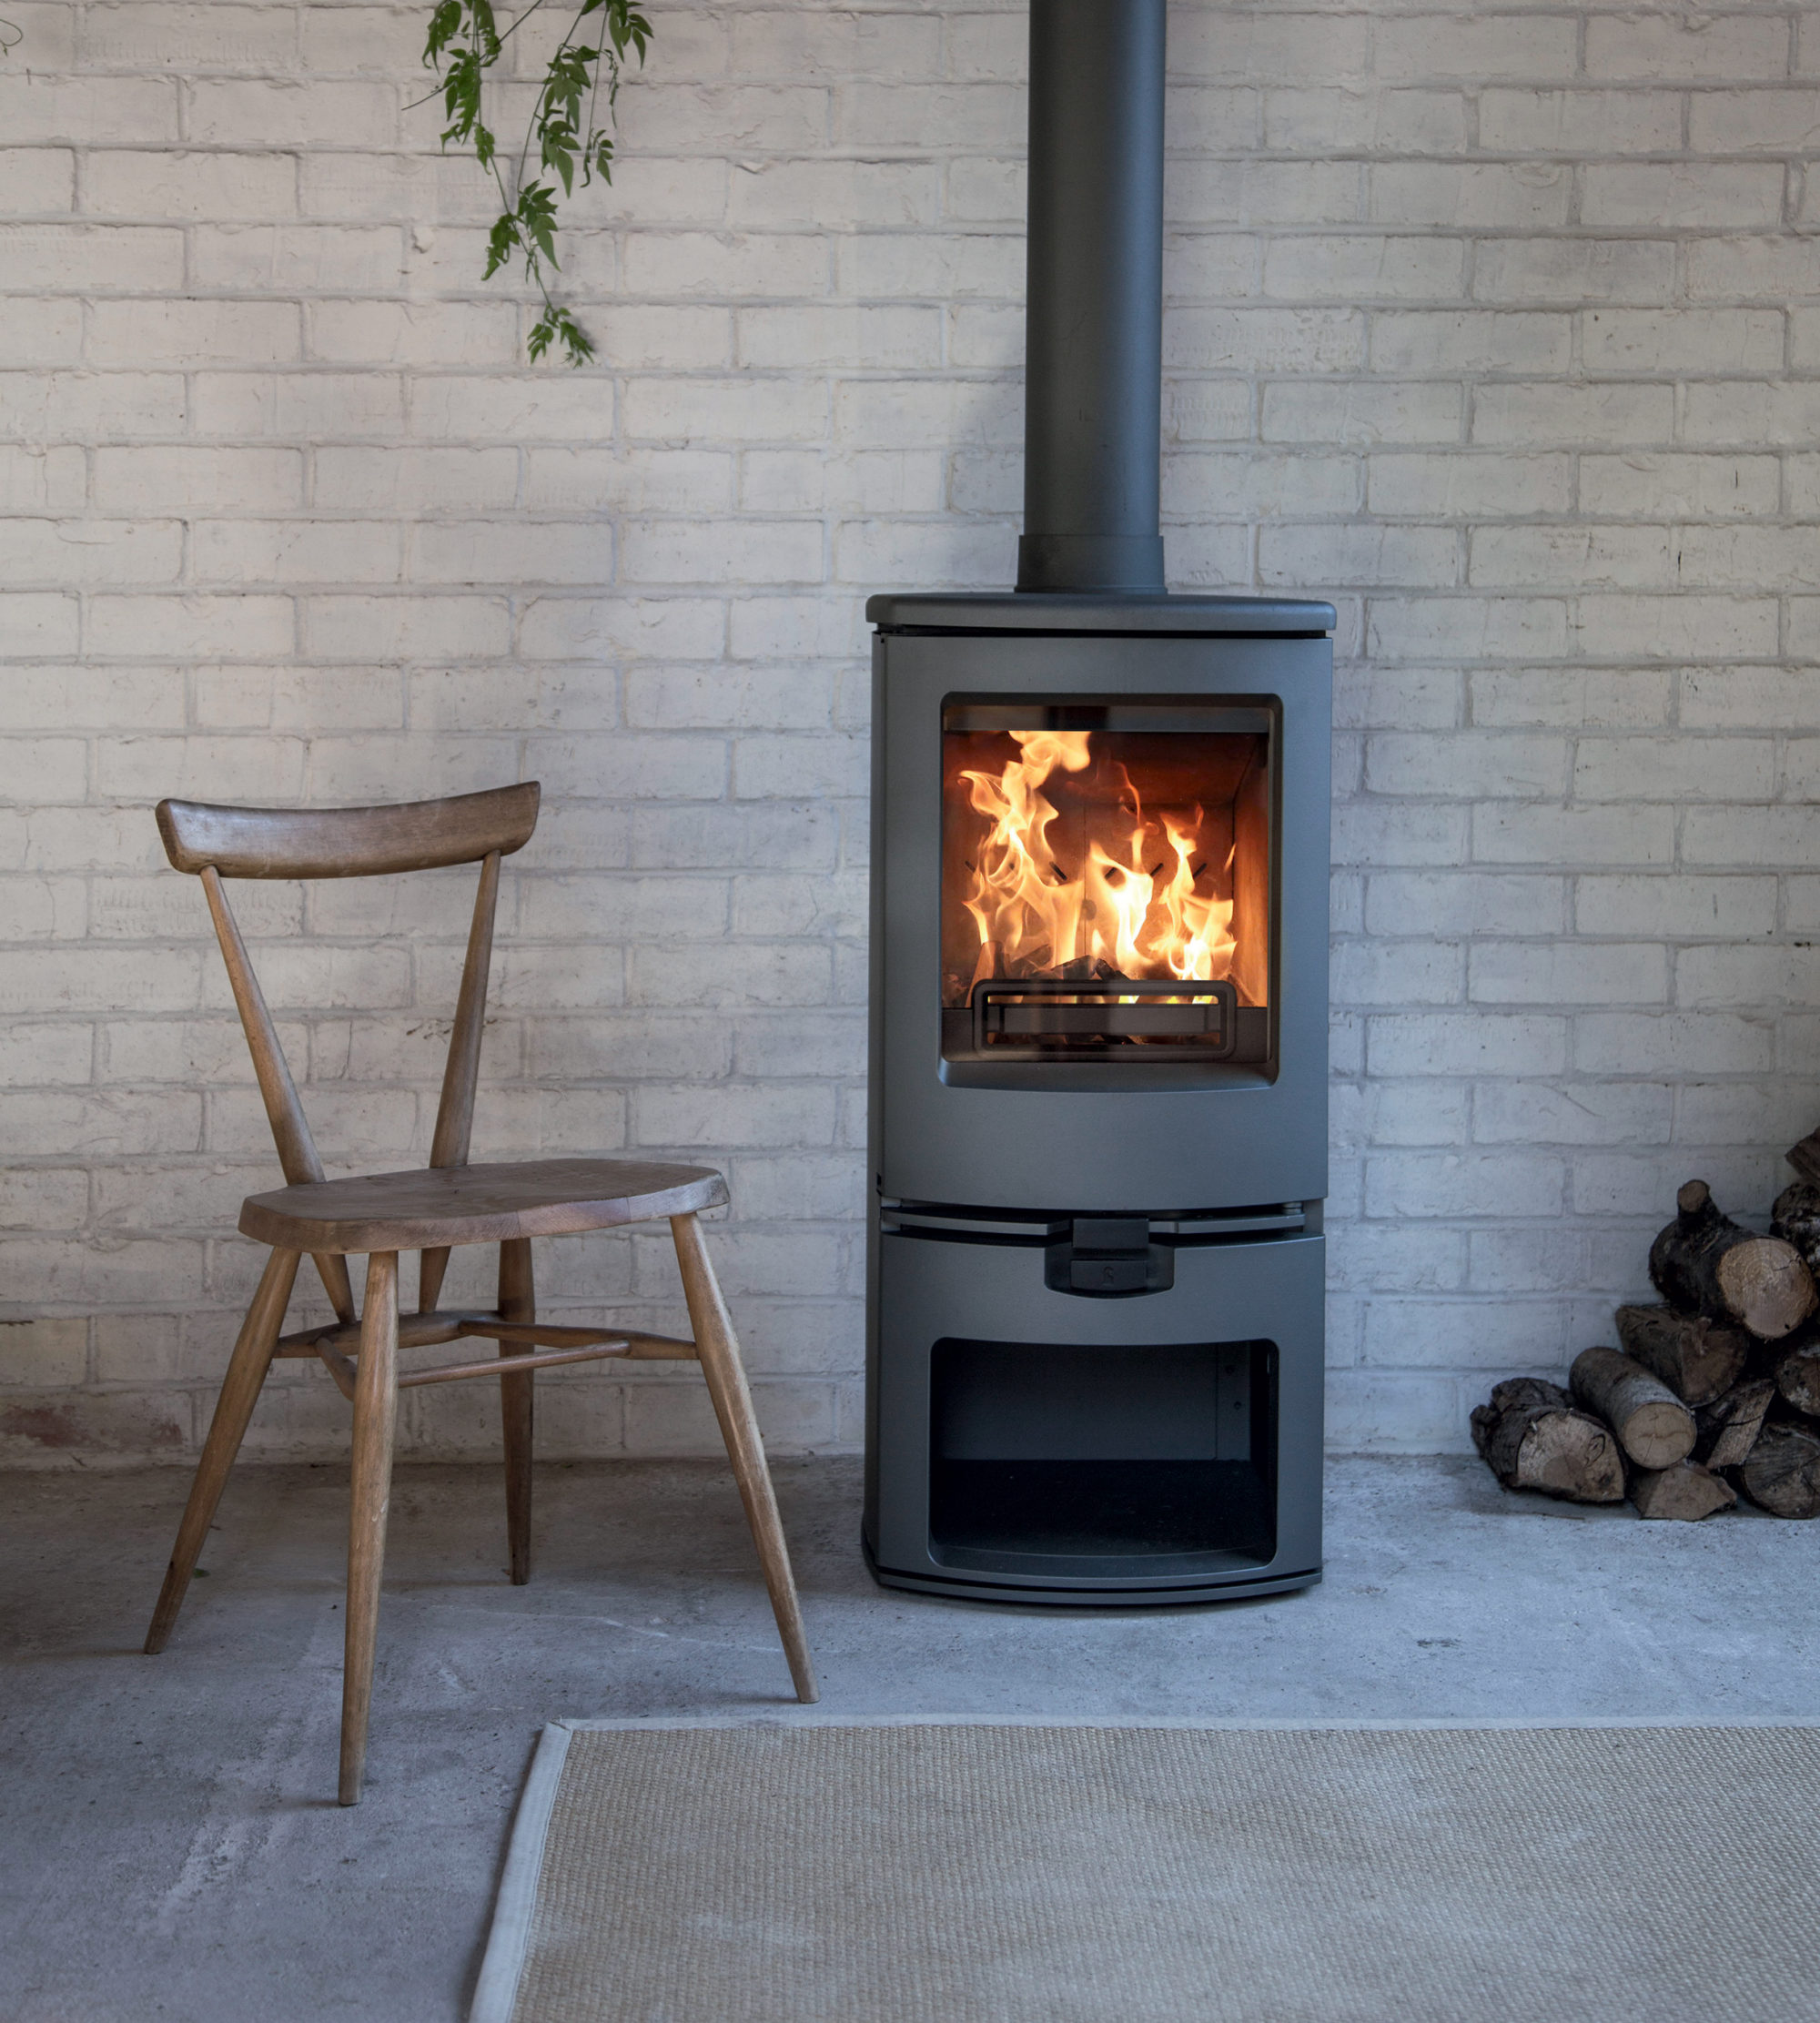 How Much Will My Woodburning Stove Cost To Install